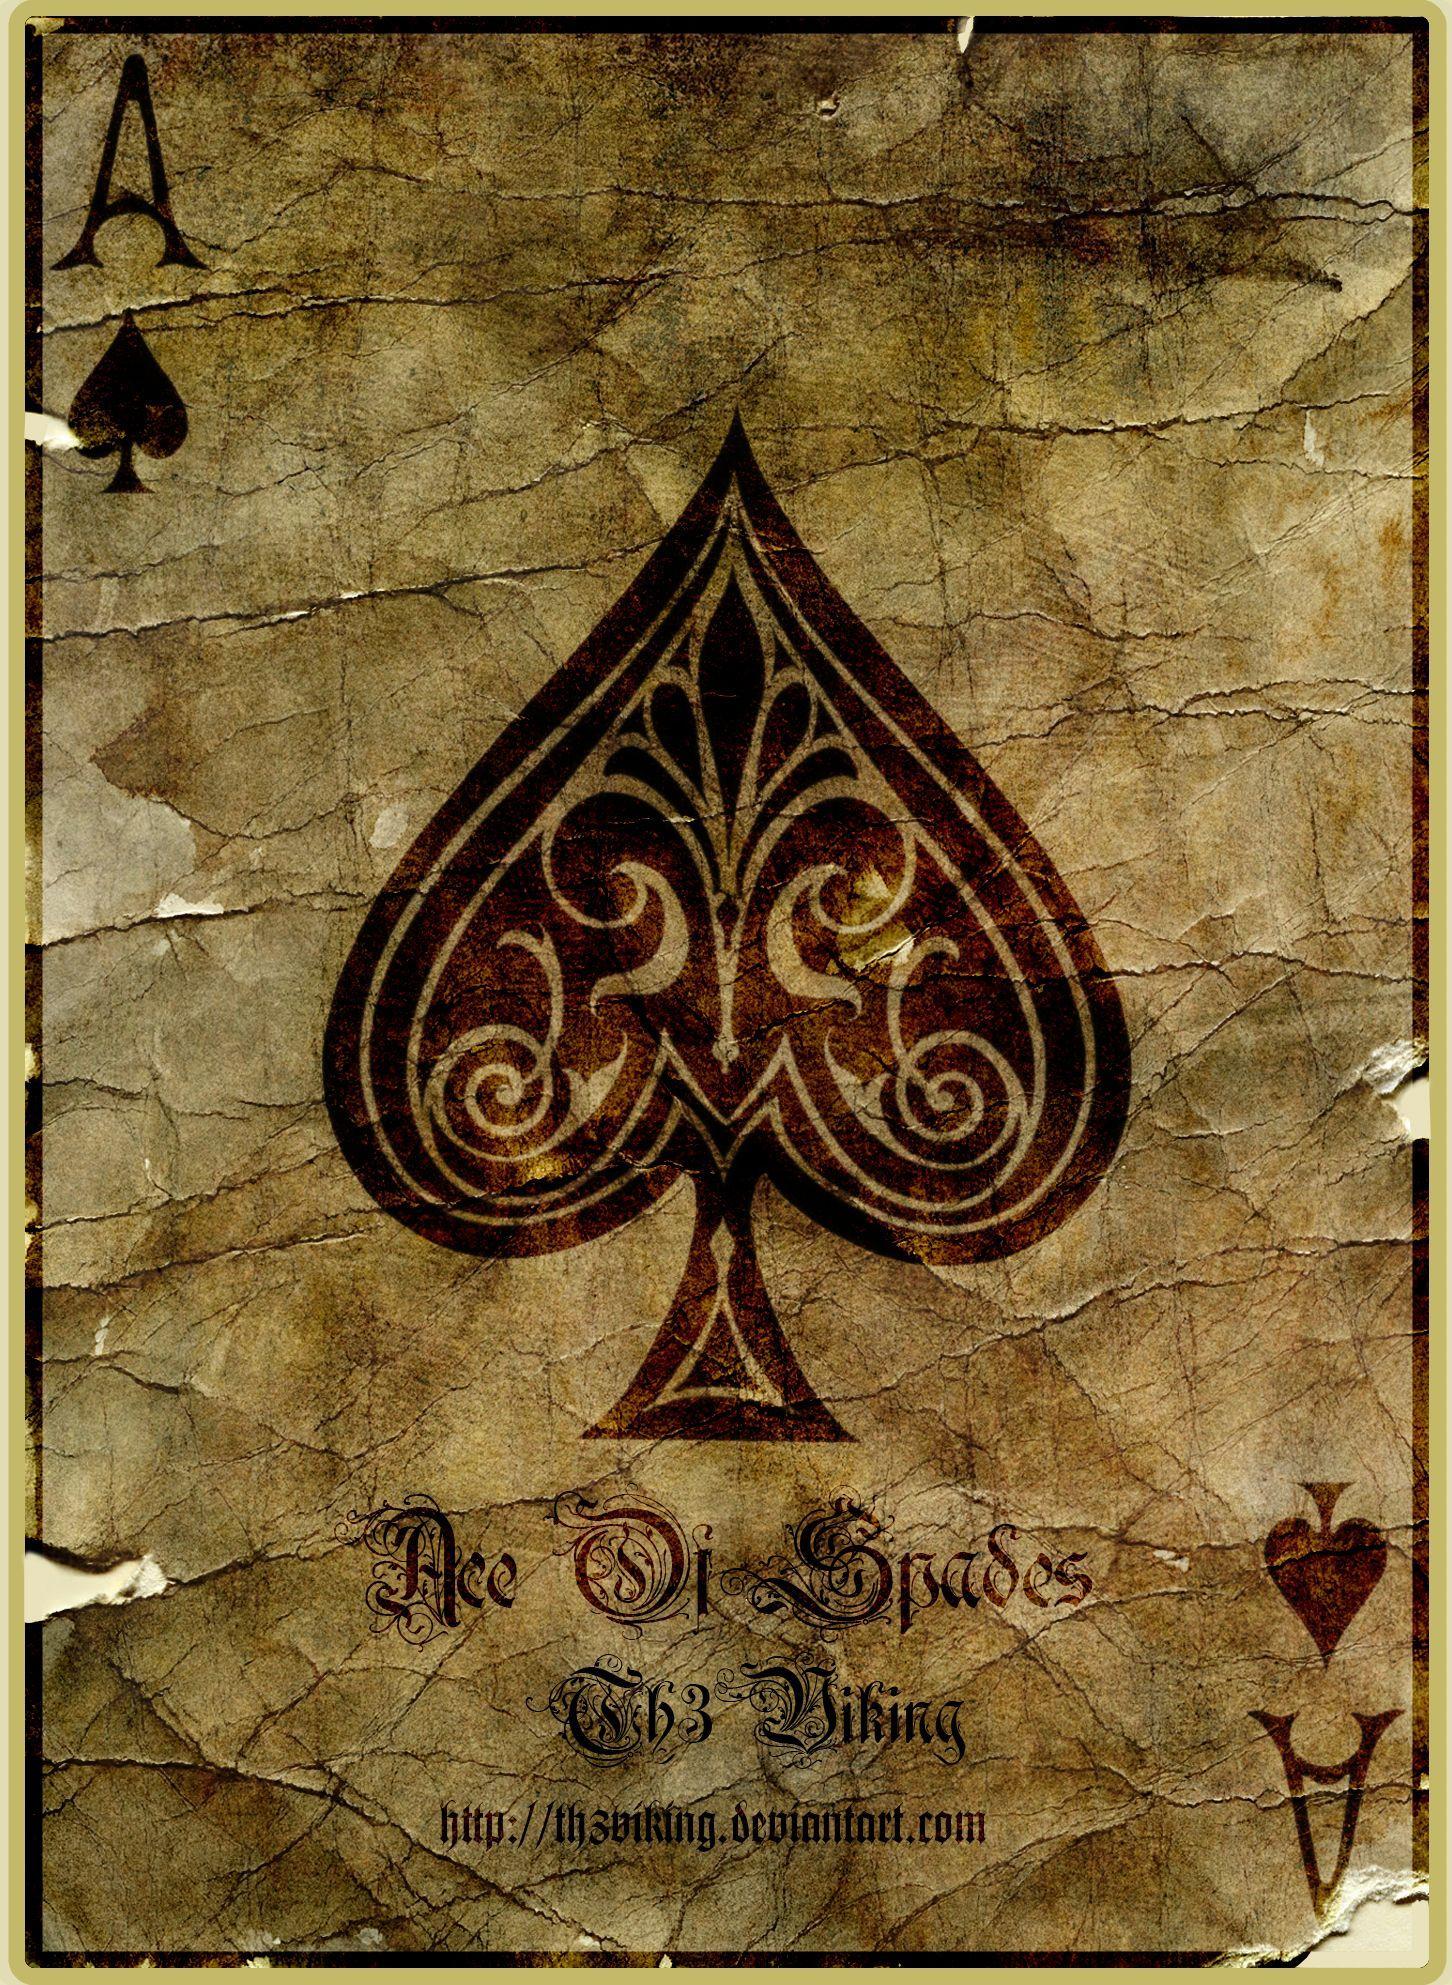 ace of spades hq official